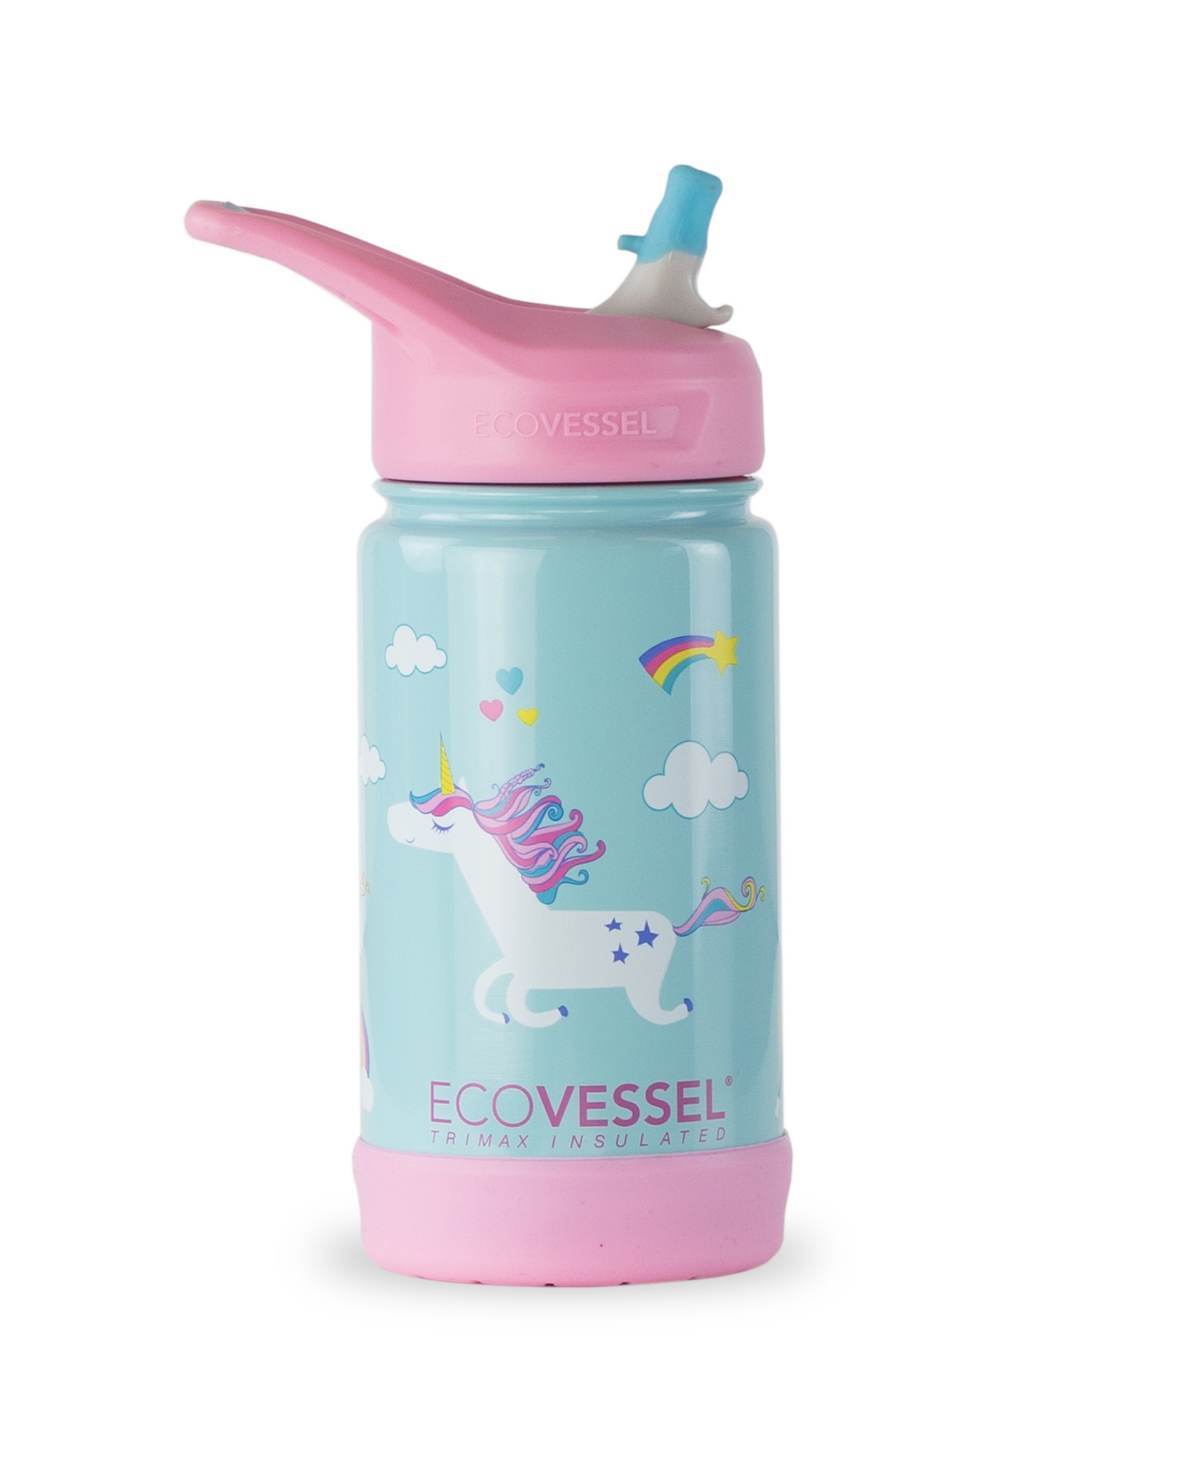 Ecovessel Frost Kids Trimax Insulated Stainless Steel Bottle With Design Flip Straw Lid And Silicone In Unicorn